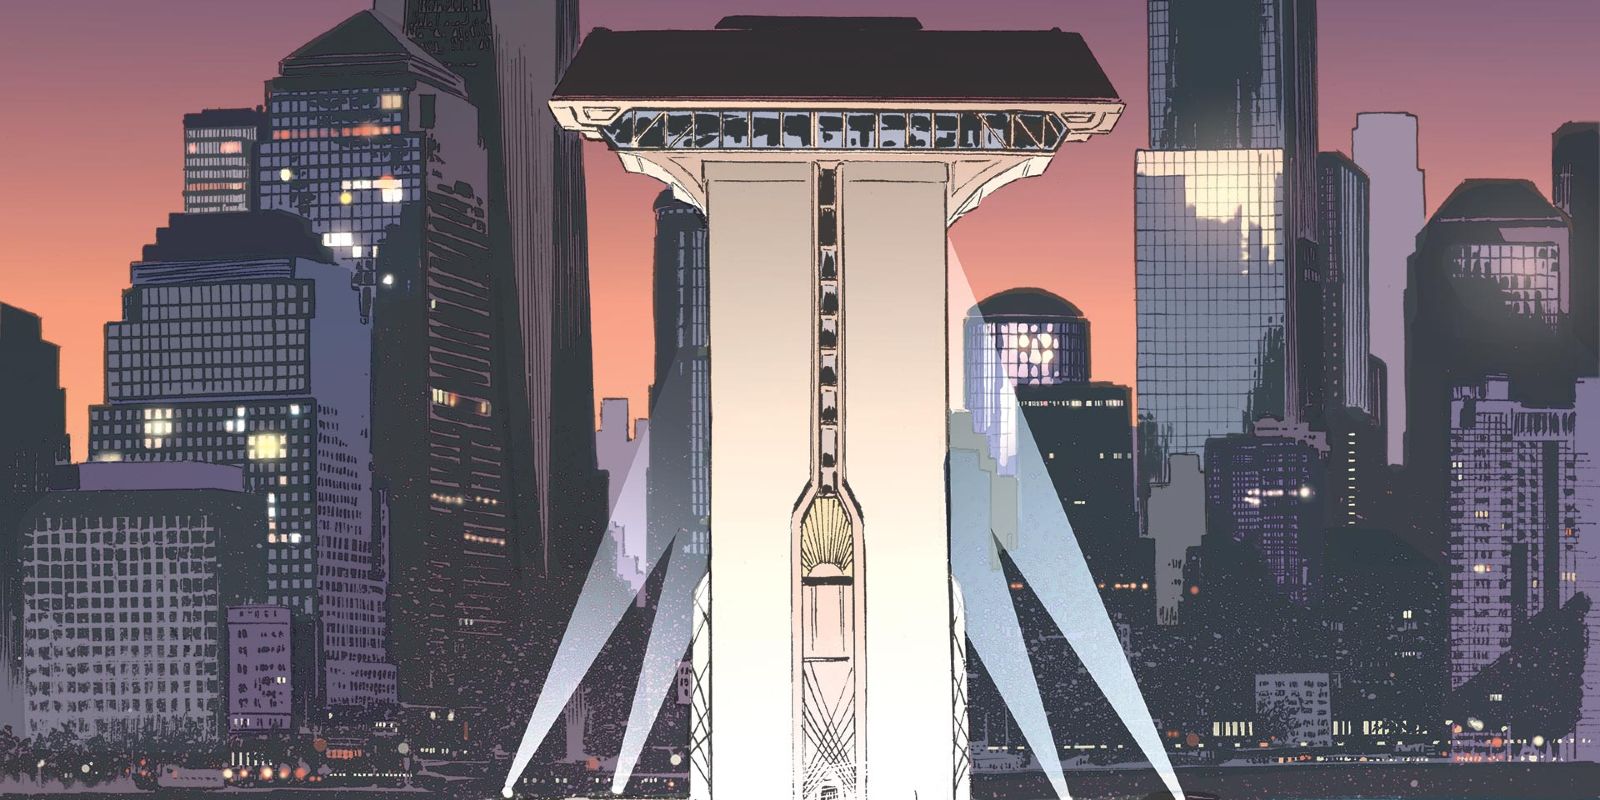 Titans Tower as depicted in DC comics